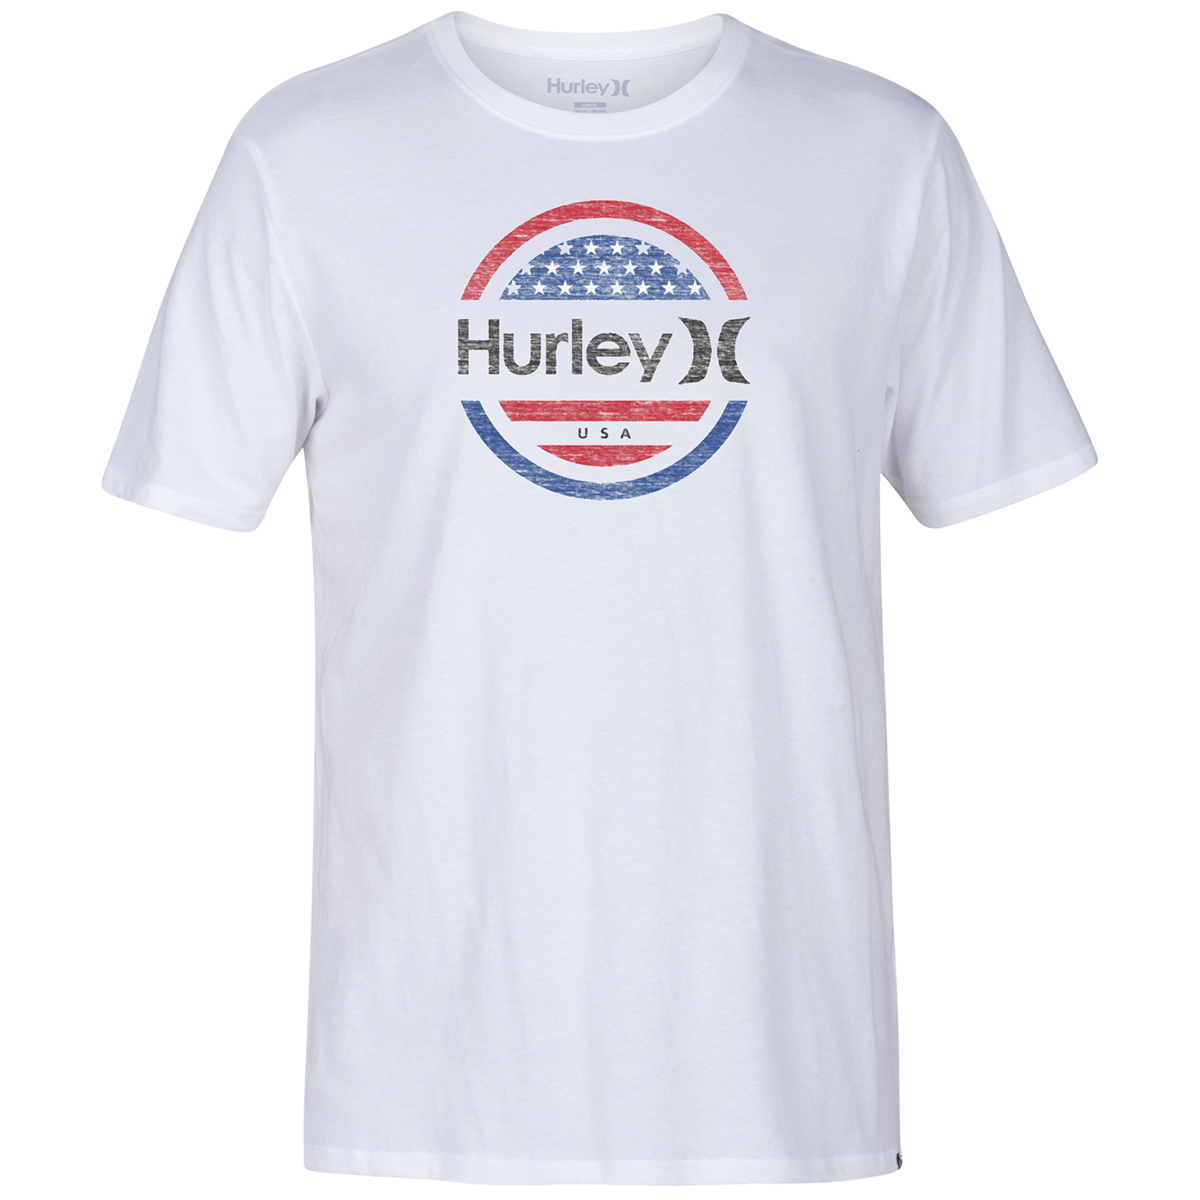 Hurley Men's Premium One And Only Circle Graphic Tee - White, L